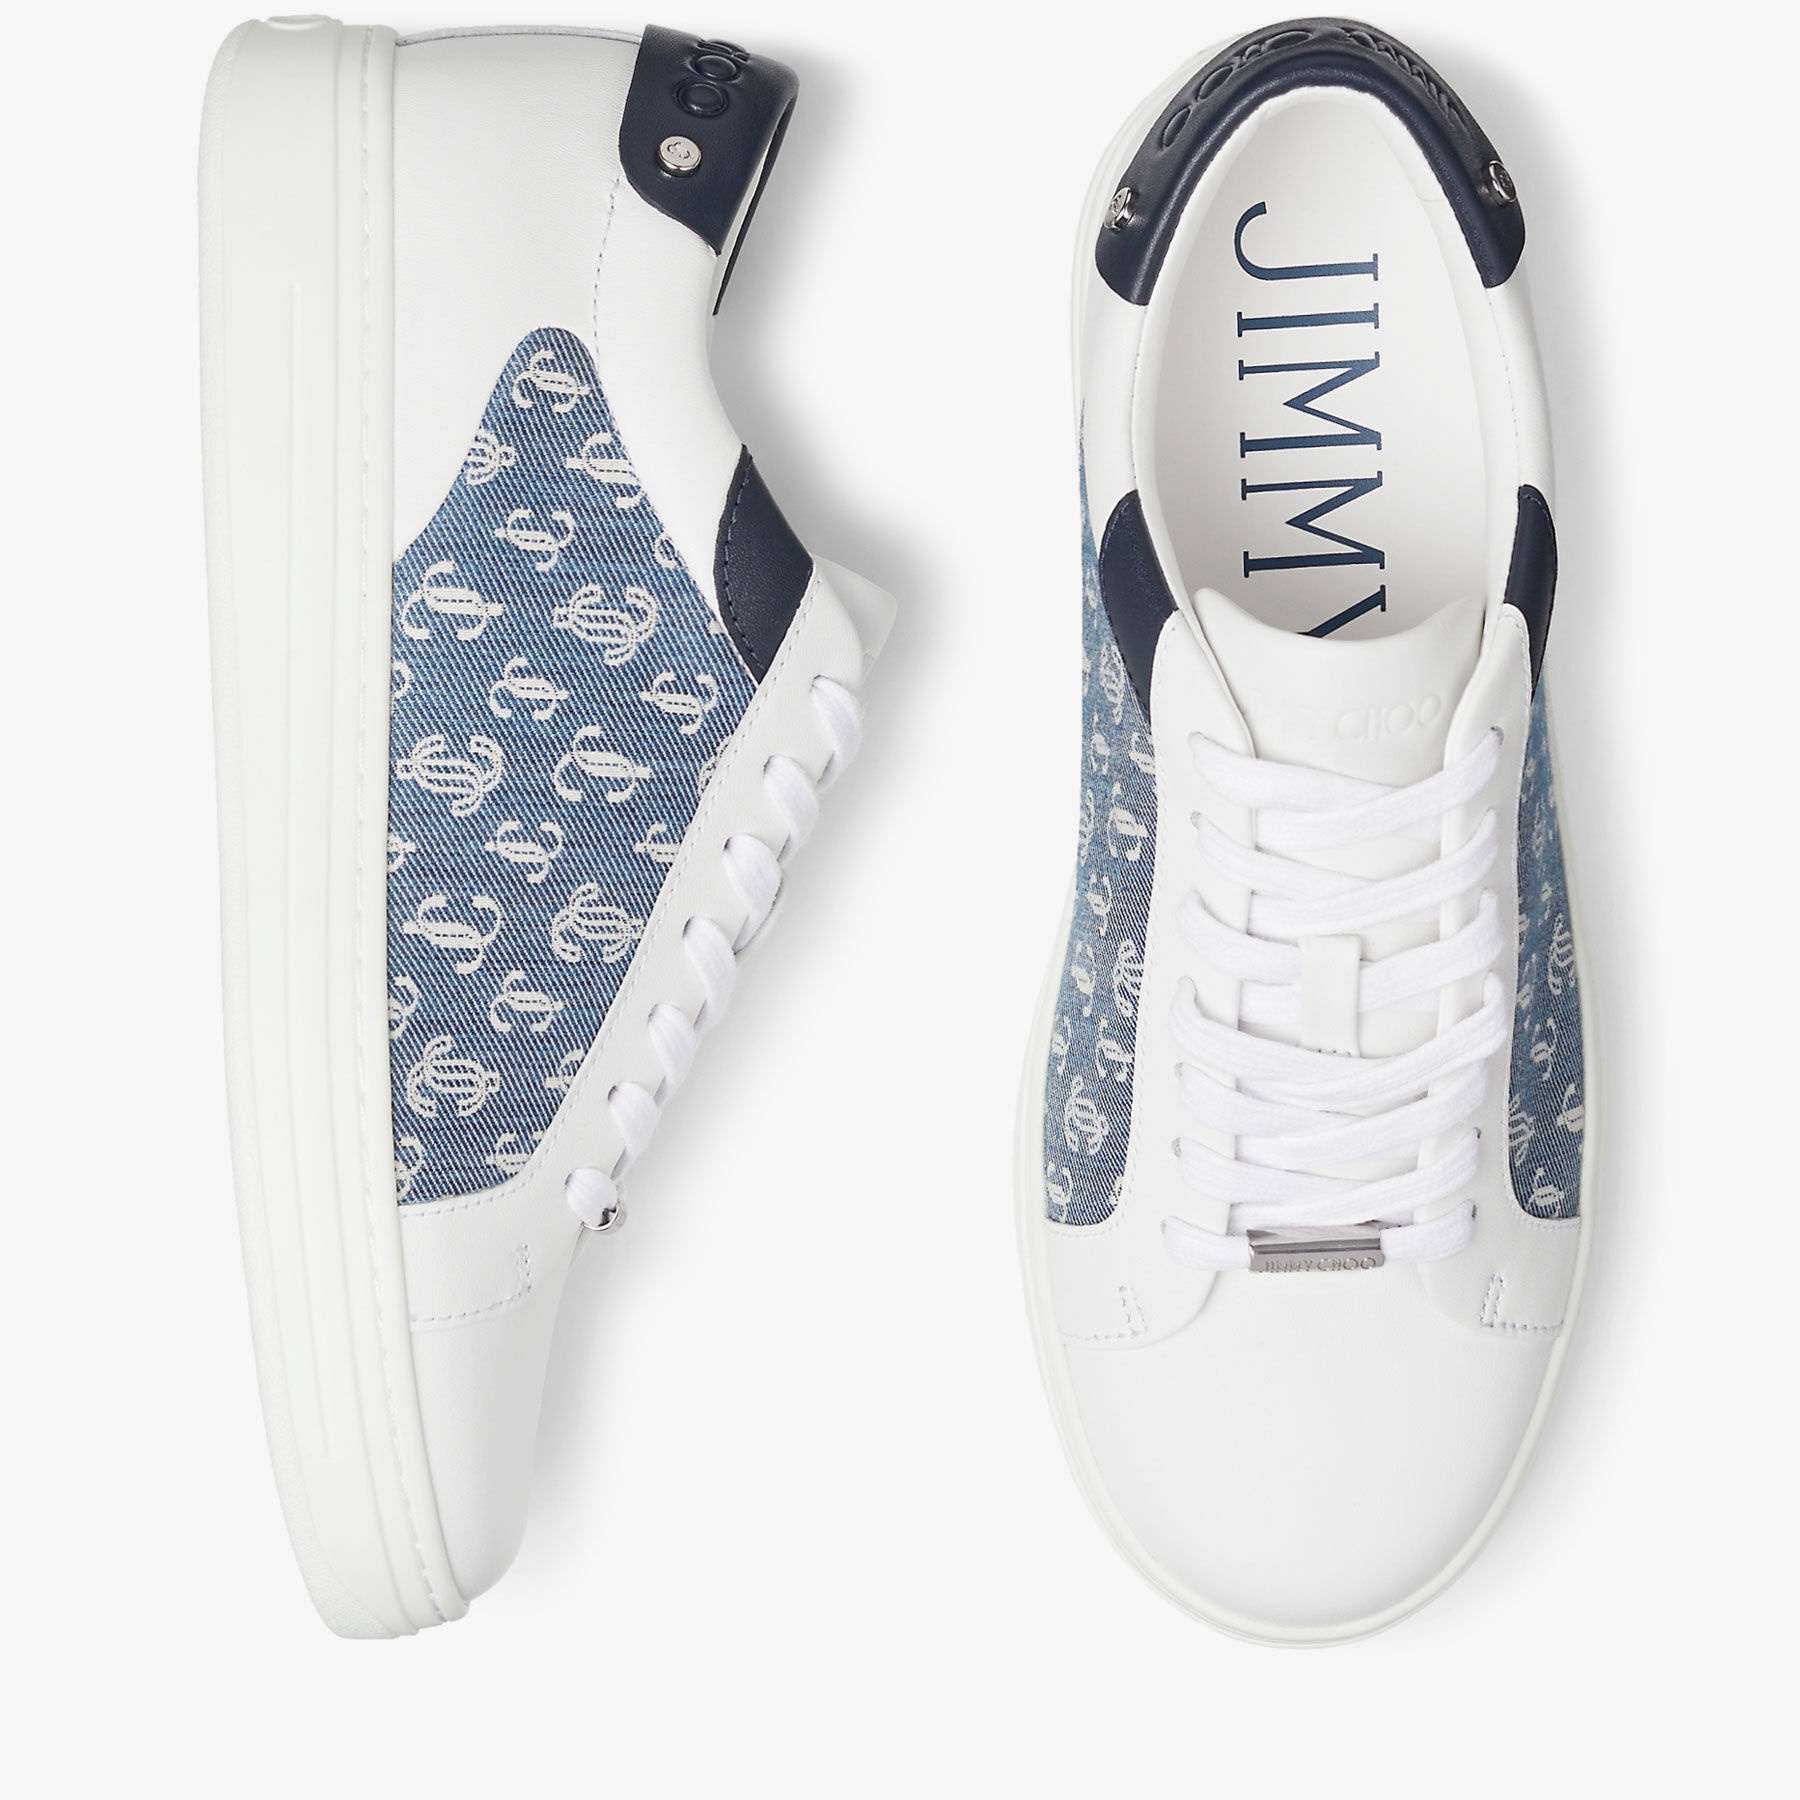 Rome/f
White Leather and Denim JC Monogram Pattern Low-Top Trainers - 6